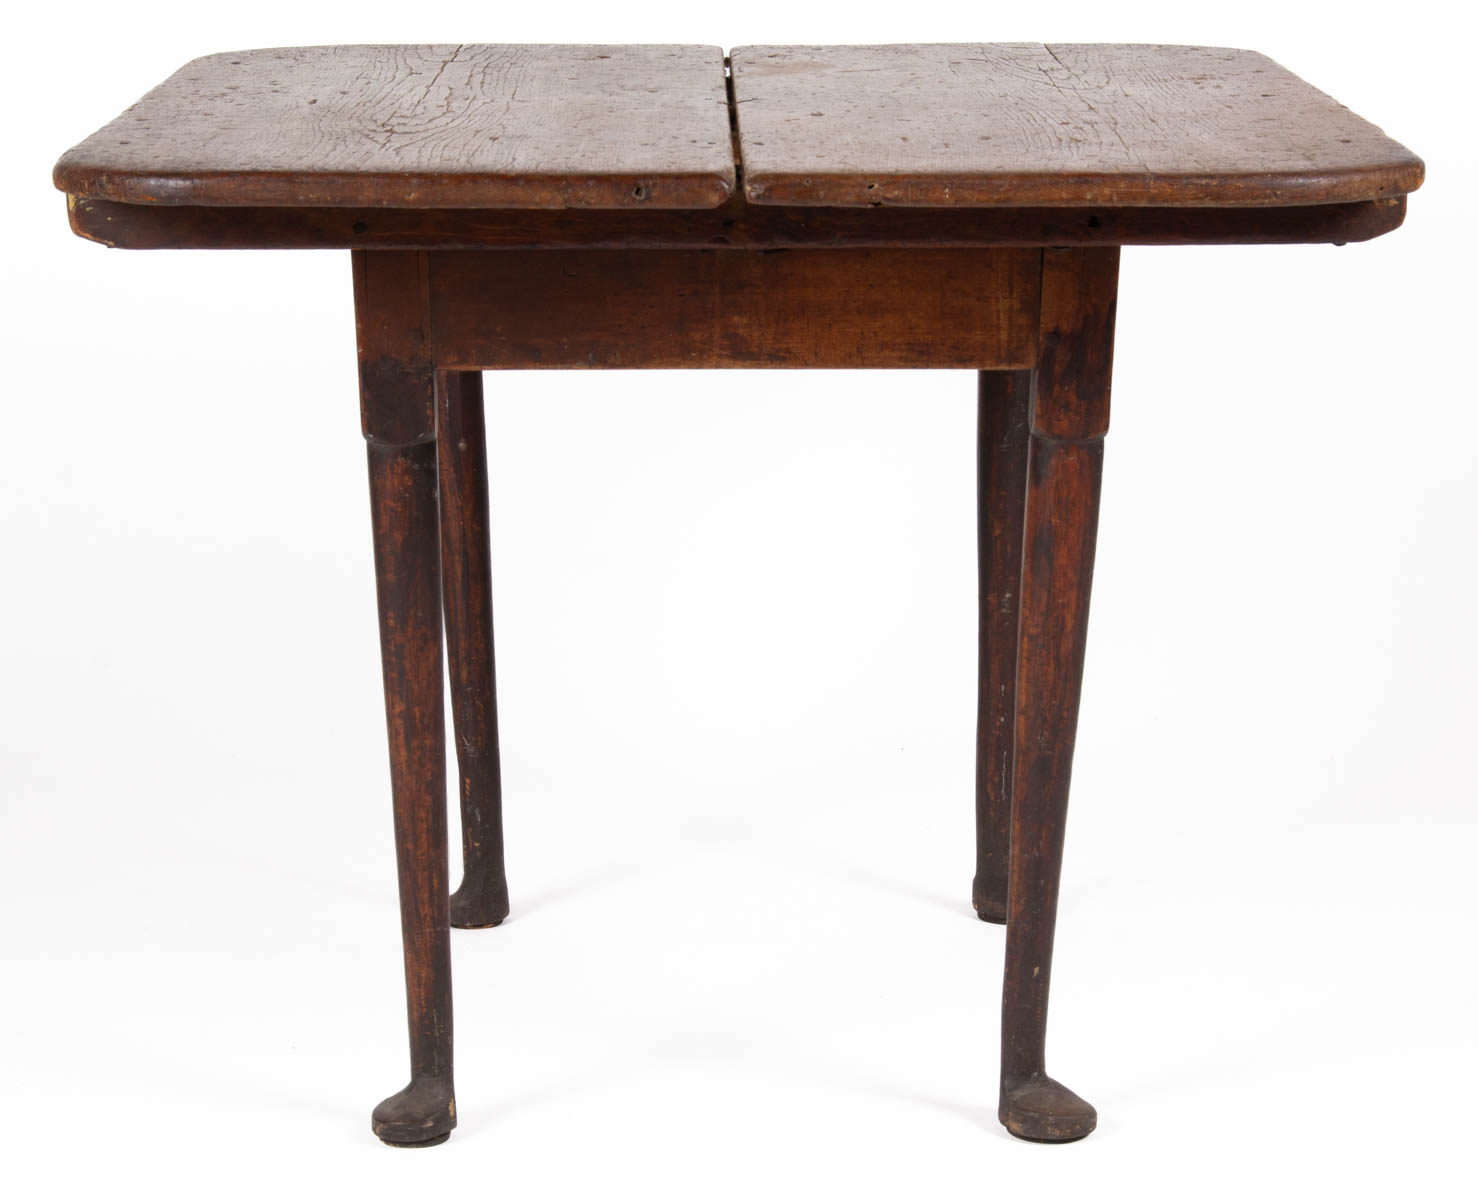 NEW ENGLAND QUEEN ANNE PINE TAVERN / WORK TABLE